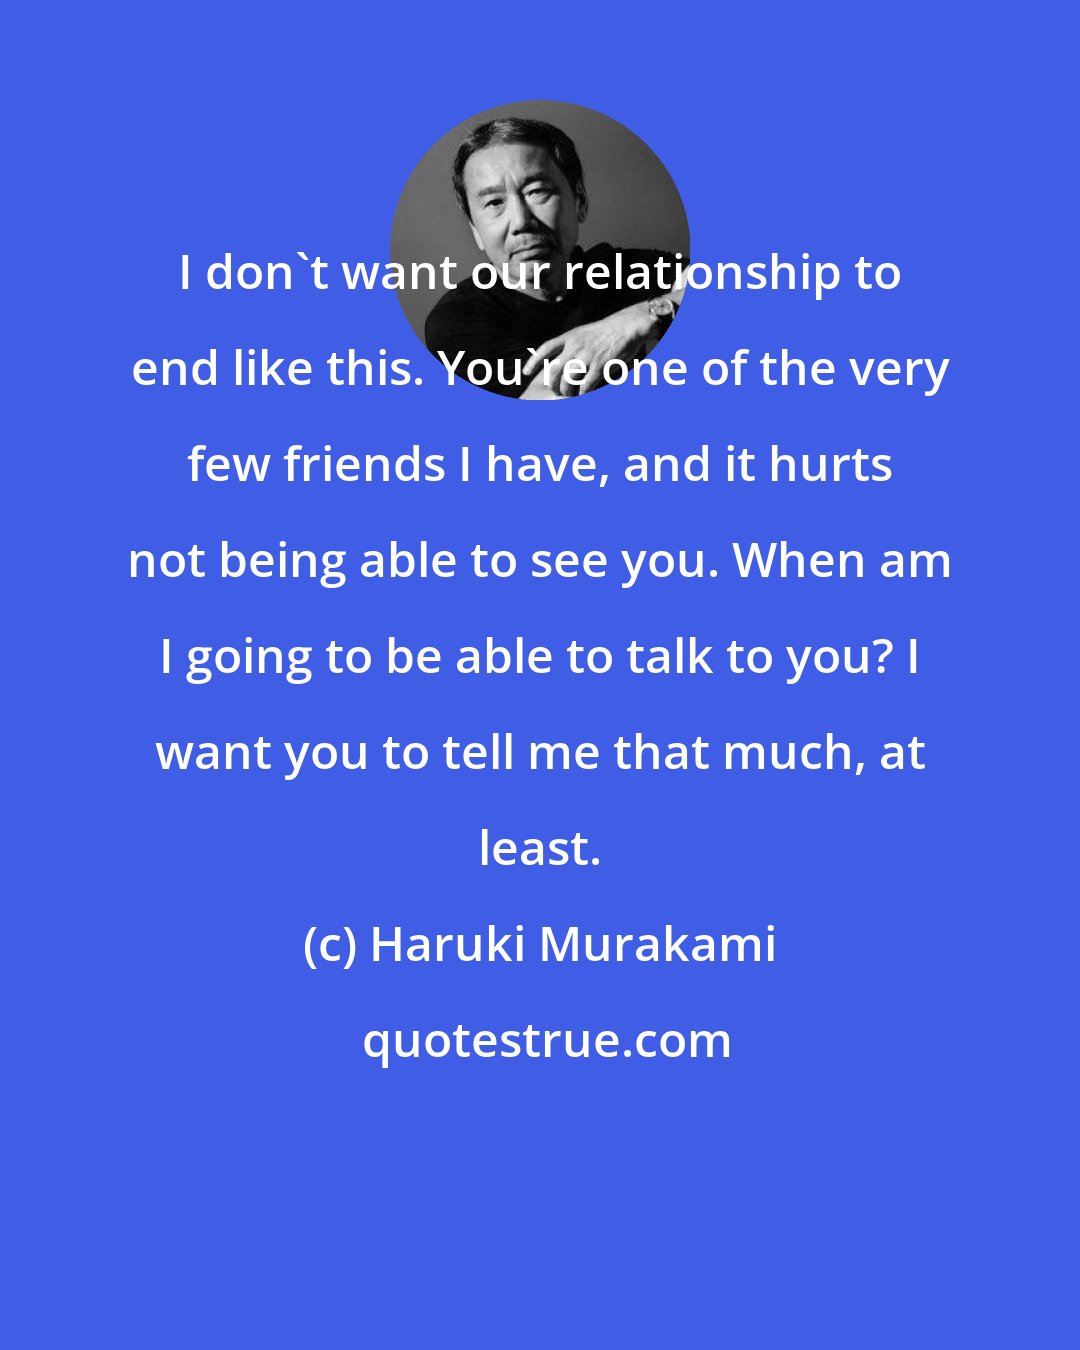 Haruki Murakami: I don't want our relationship to end like this. You're one of the very few friends I have, and it hurts not being able to see you. When am I going to be able to talk to you? I want you to tell me that much, at least.